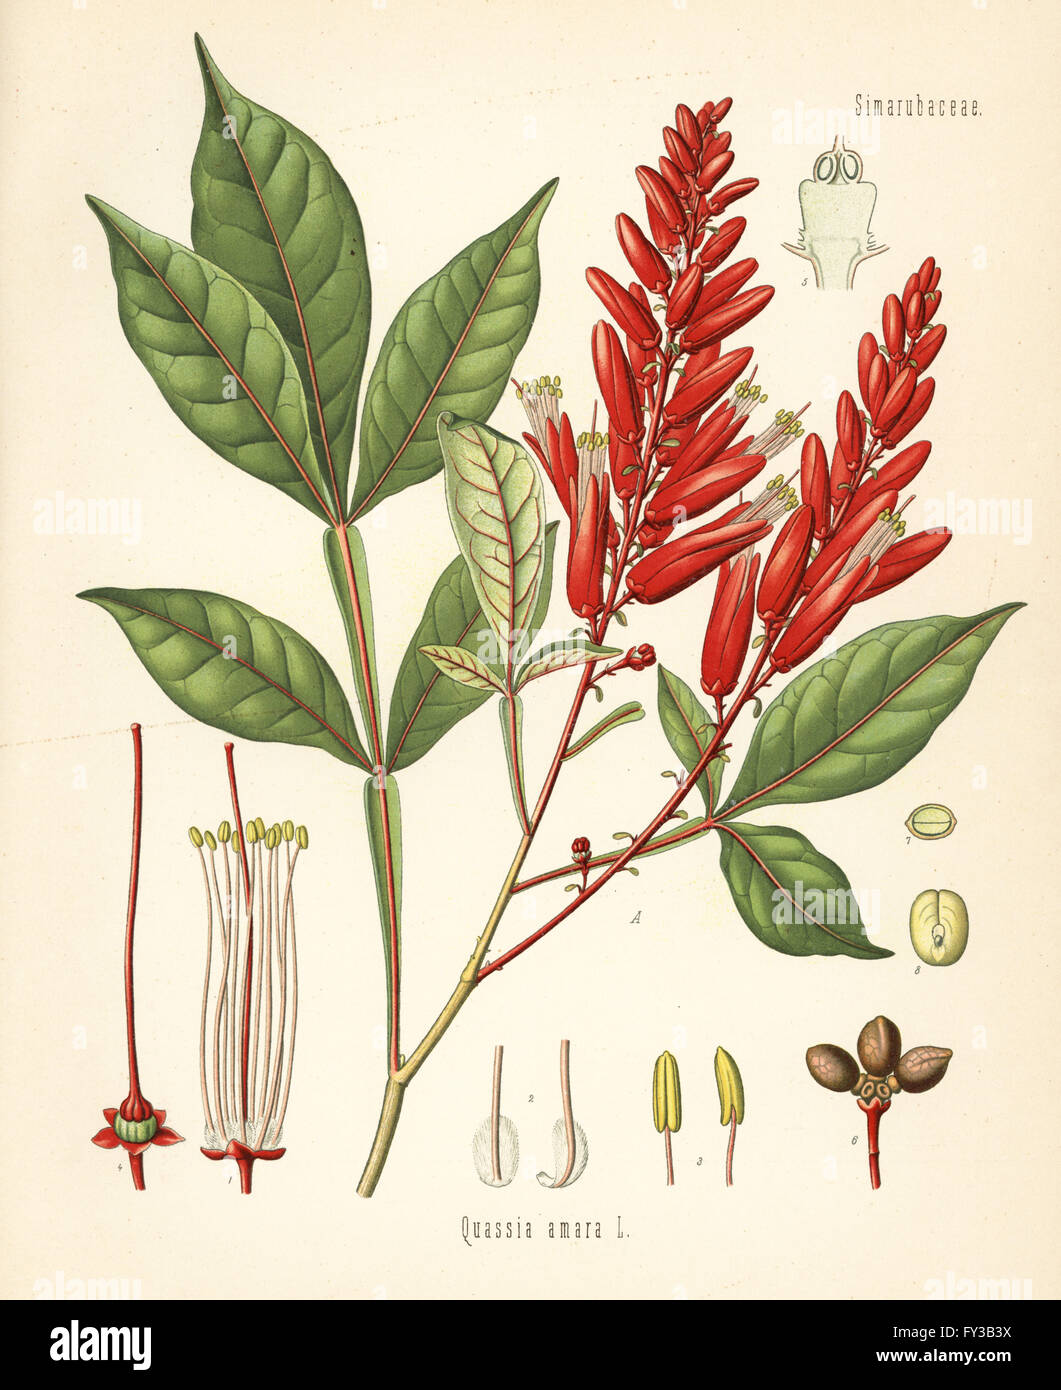 Amargo, bitter-ash or bitter-wood, Quassia amara. Chromolithograph after a botanical illustration from Hermann Adolph Koehler's Medicinal Plants, edited by Gustav Pabst, Koehler, Germany, 1887. Stock Photo